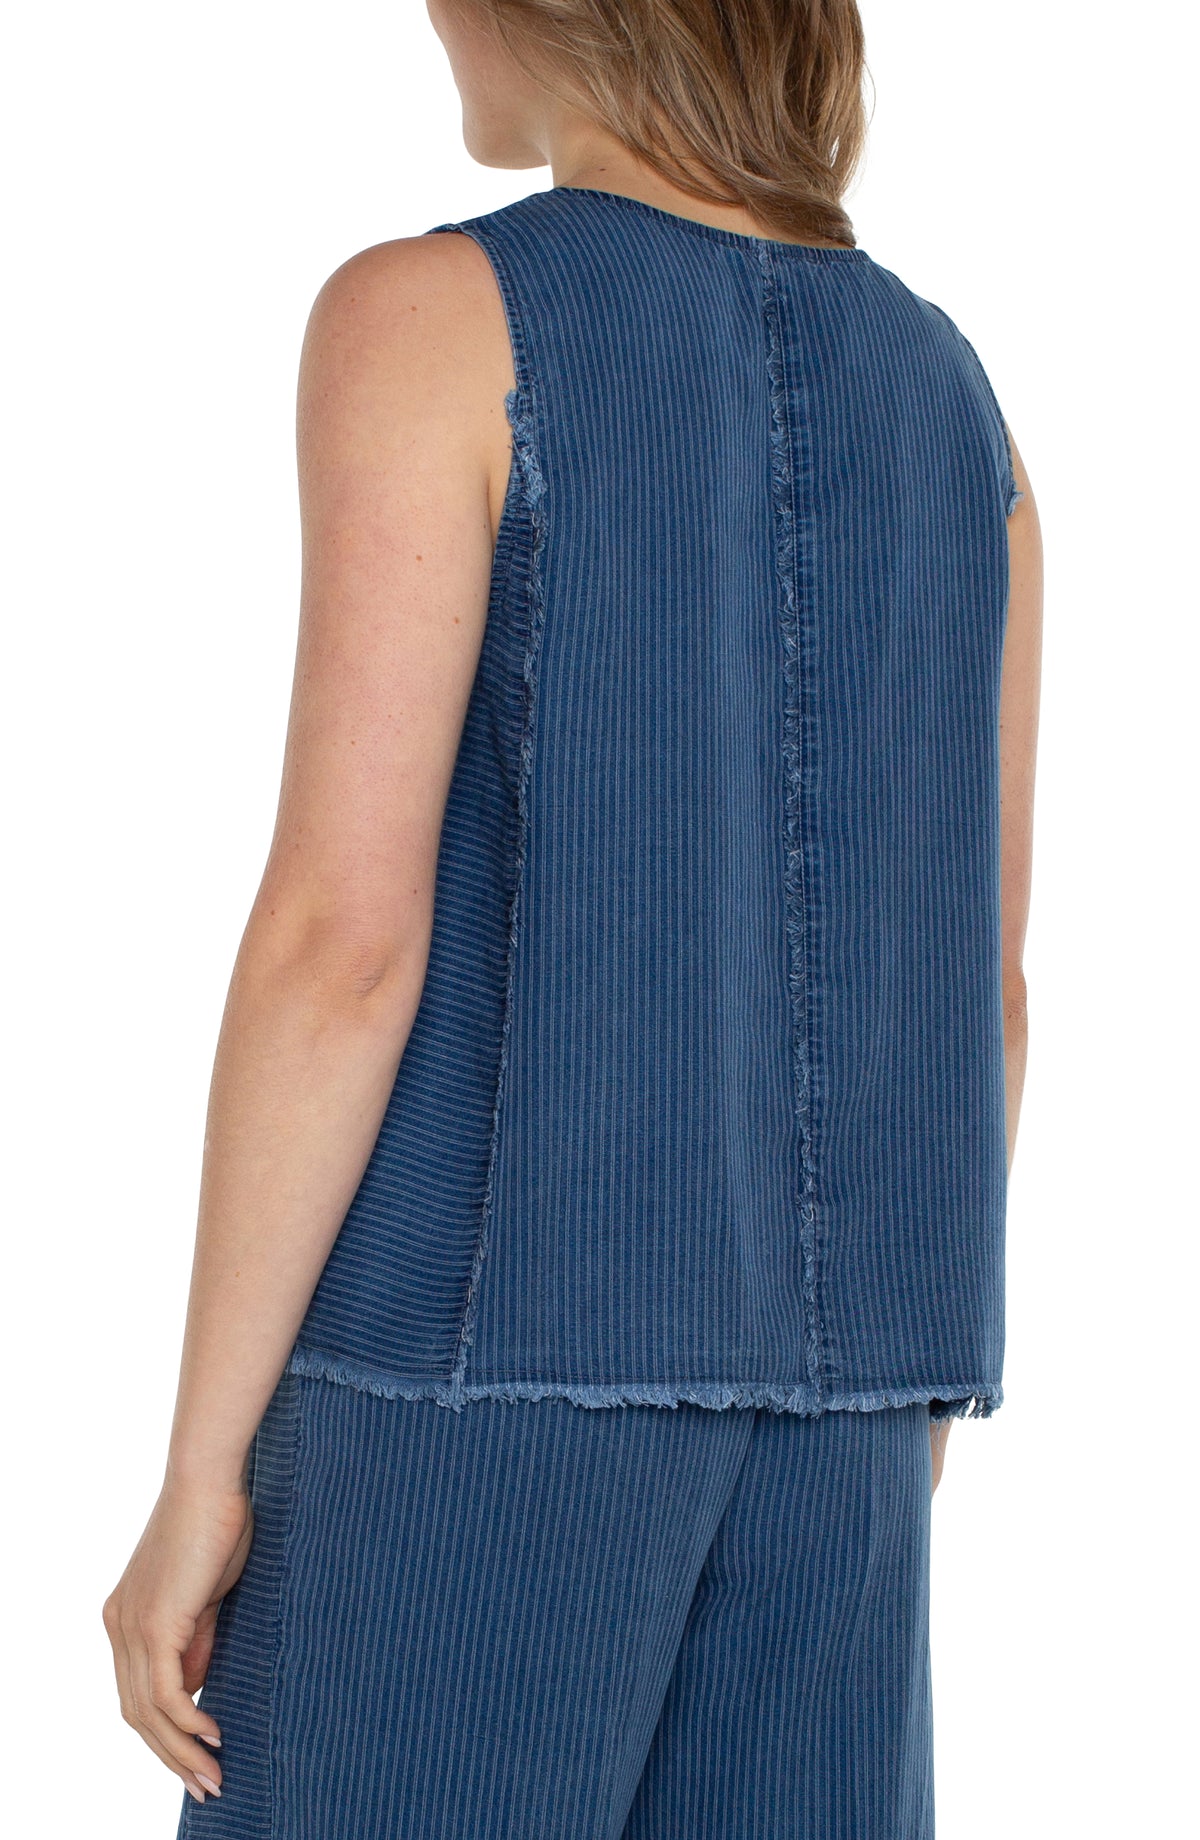 Sleeveless Scoop Neck with Fray